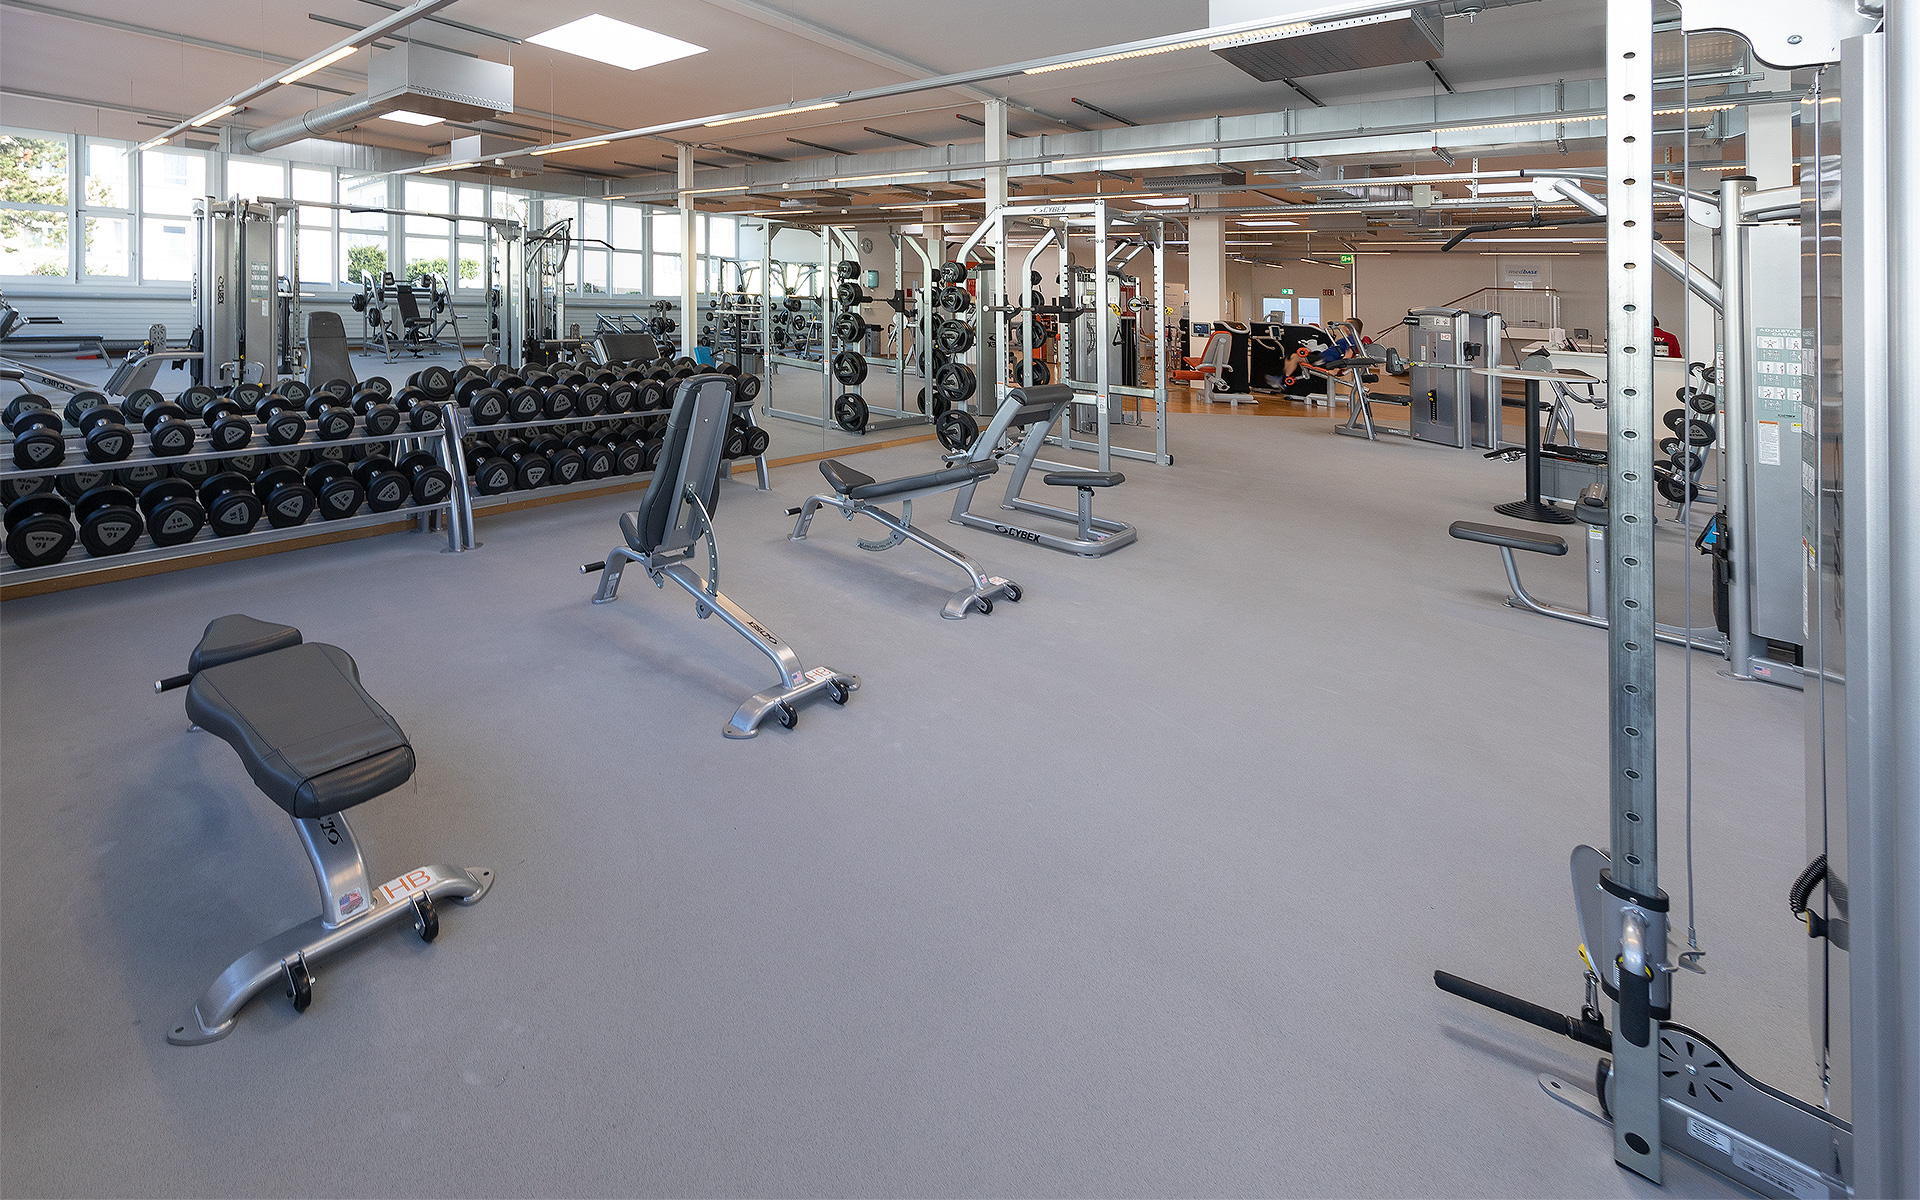 Free weight area with dumbbells, barbells and cable pulley in the ACTIV FITNESS studio in Gossau.